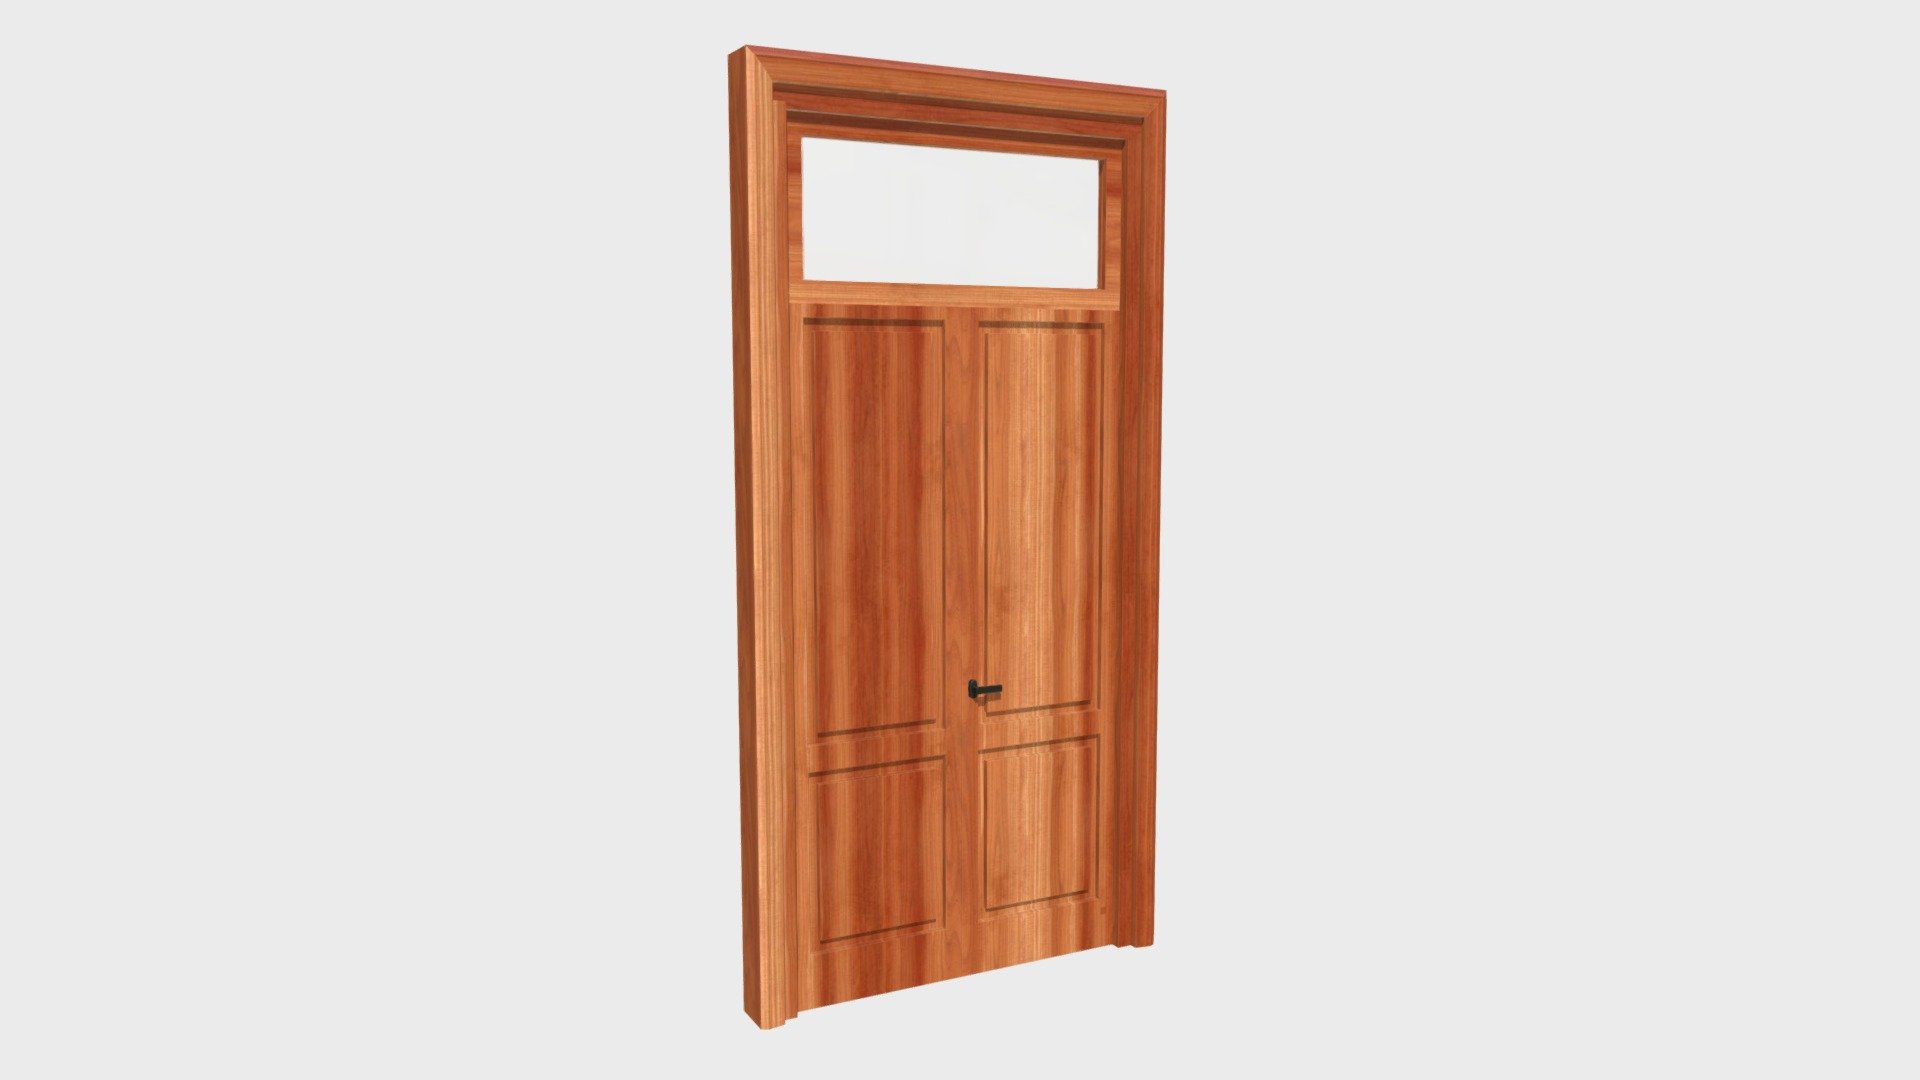 === The following description refers to the additional ZIP package provided with this model ===
Wooden door with transom glass window on top 3D Model. 5 individual objects (frame, glass top, 2 doors, handle; so, you can easily rotate or even animate the doors), sharing 2 non overlapping UV Layout maps (glass, other), Materials and PBR Textures sets. Production-ready 3D Model, with PBR materials, textures, non overlapping UV Layout map provided in the package.
Quads only geometries (no tris/ngons).
Formats included: FBX, OBJ; scenes: BLEND (with Cycles / Eevee PBR Materials and Textures); other: png with Alpha.
5 Objects (meshes), 2 PBR Materials, UV unwrapped (non overlapping UV Layout map provided in the package); UV-mapped Textures.
UV Layout maps and Image Textures resolutions: 2048x2048; PBR Textures made with Substance Painter.
Polygonal, QUADS ONLY (no tris/ngons); 12758 vertices, 12214 quad faces (24428 tris).
Real world dimensions; scene scale units: cm in Blender 3.2 (that is: Metric with 0.01 scale) - Wooden door with transom window - Buy Royalty Free 3D model by FrancescoMilanese 3d model